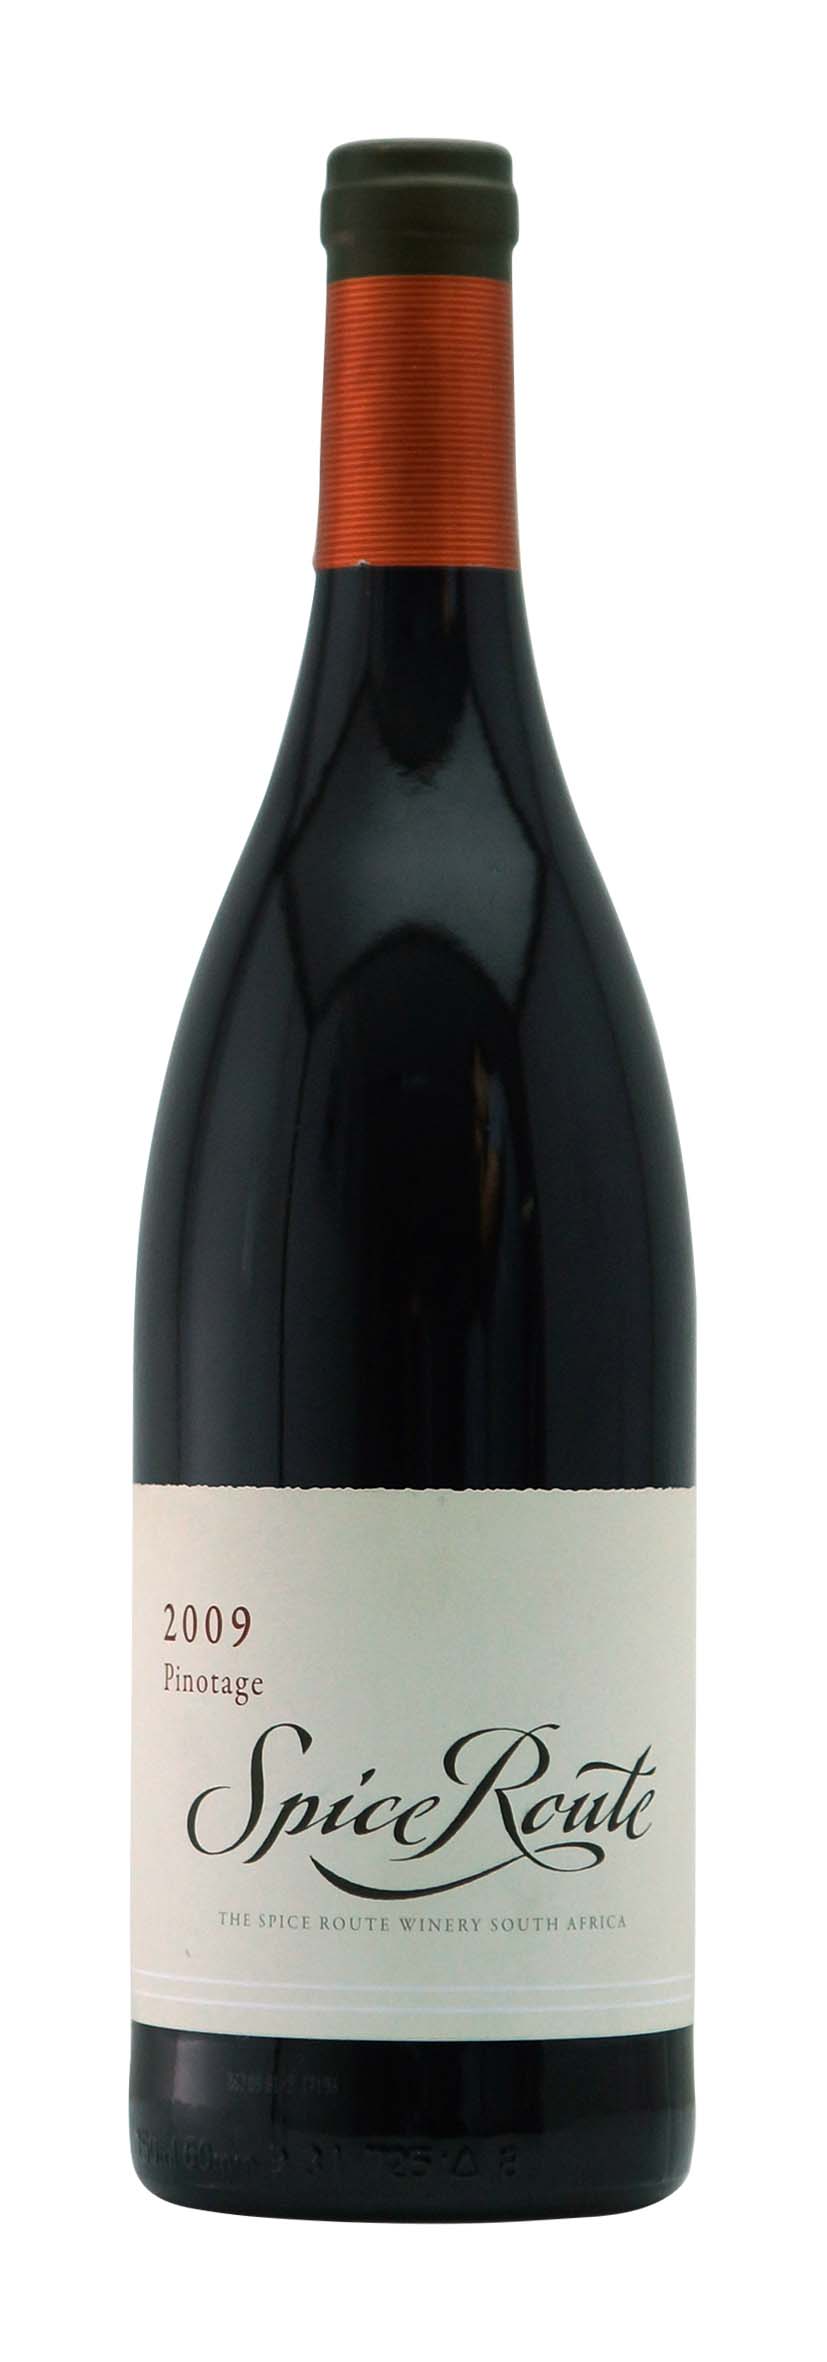 Swartland Pinotage Spice Route 2009